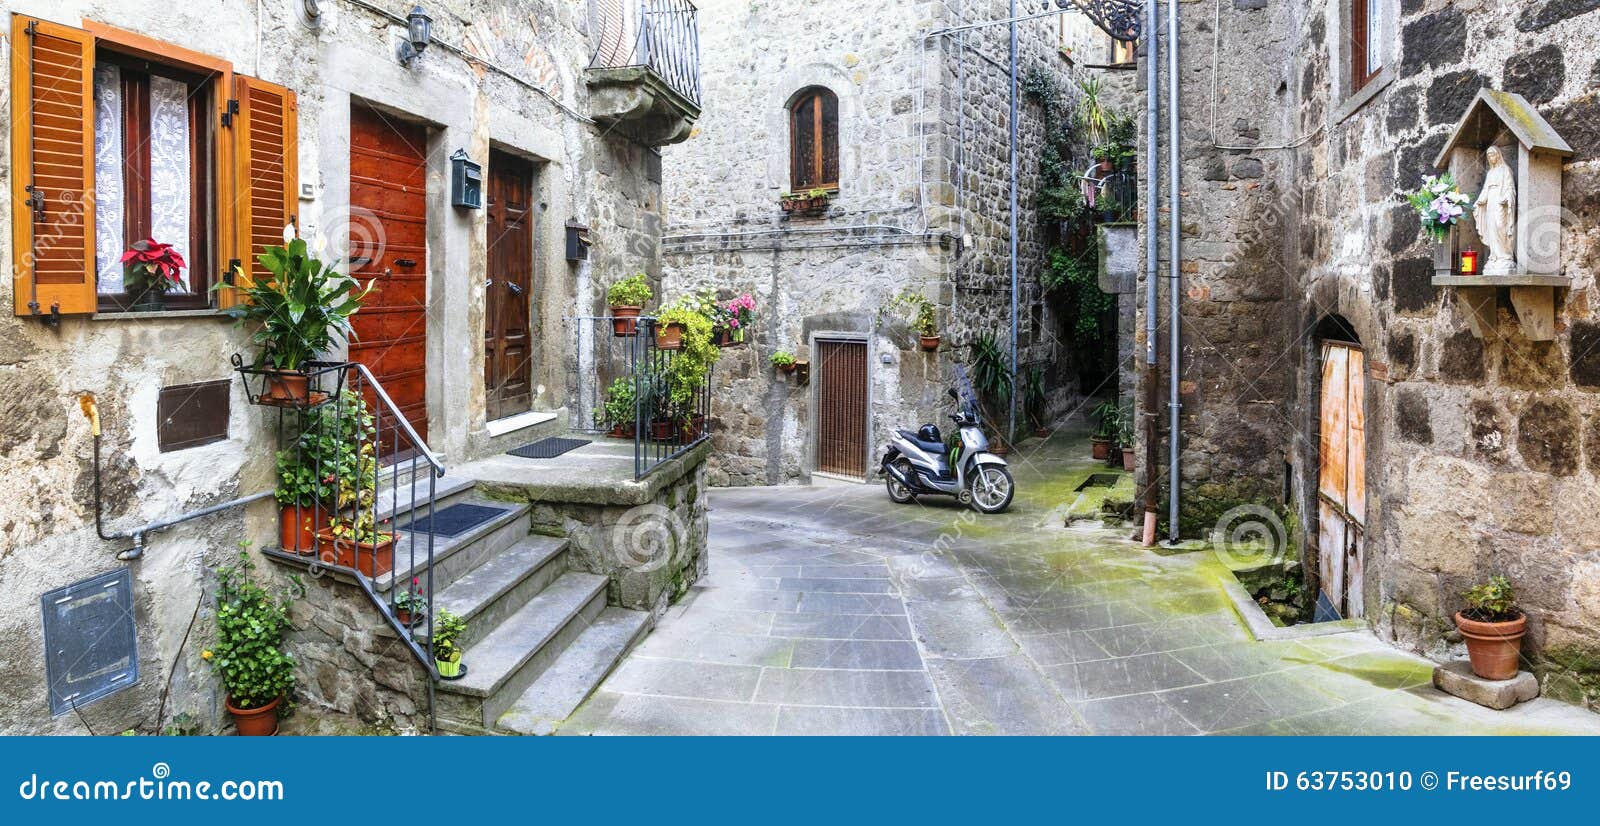 charming streets of old italian villages